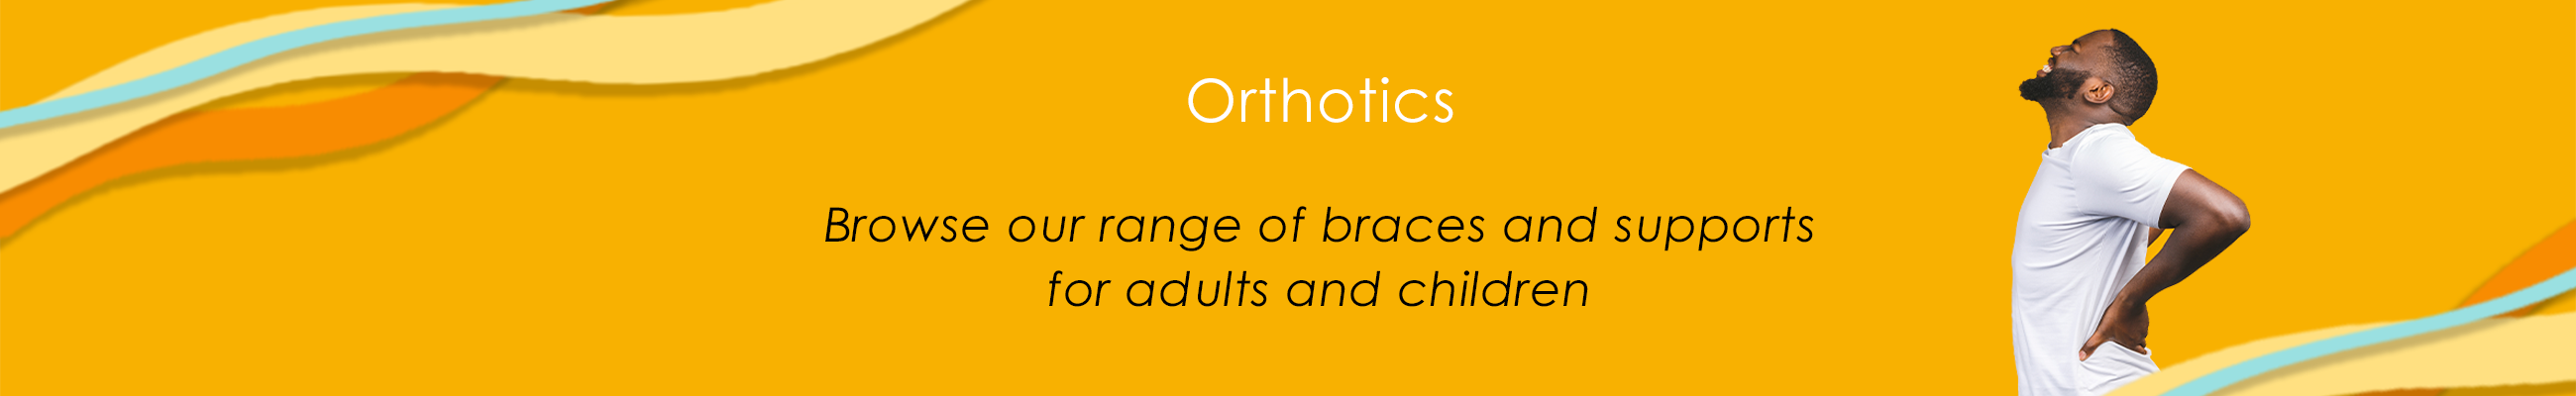 Orthotics - browse our range of braces and supports for adults and children. 